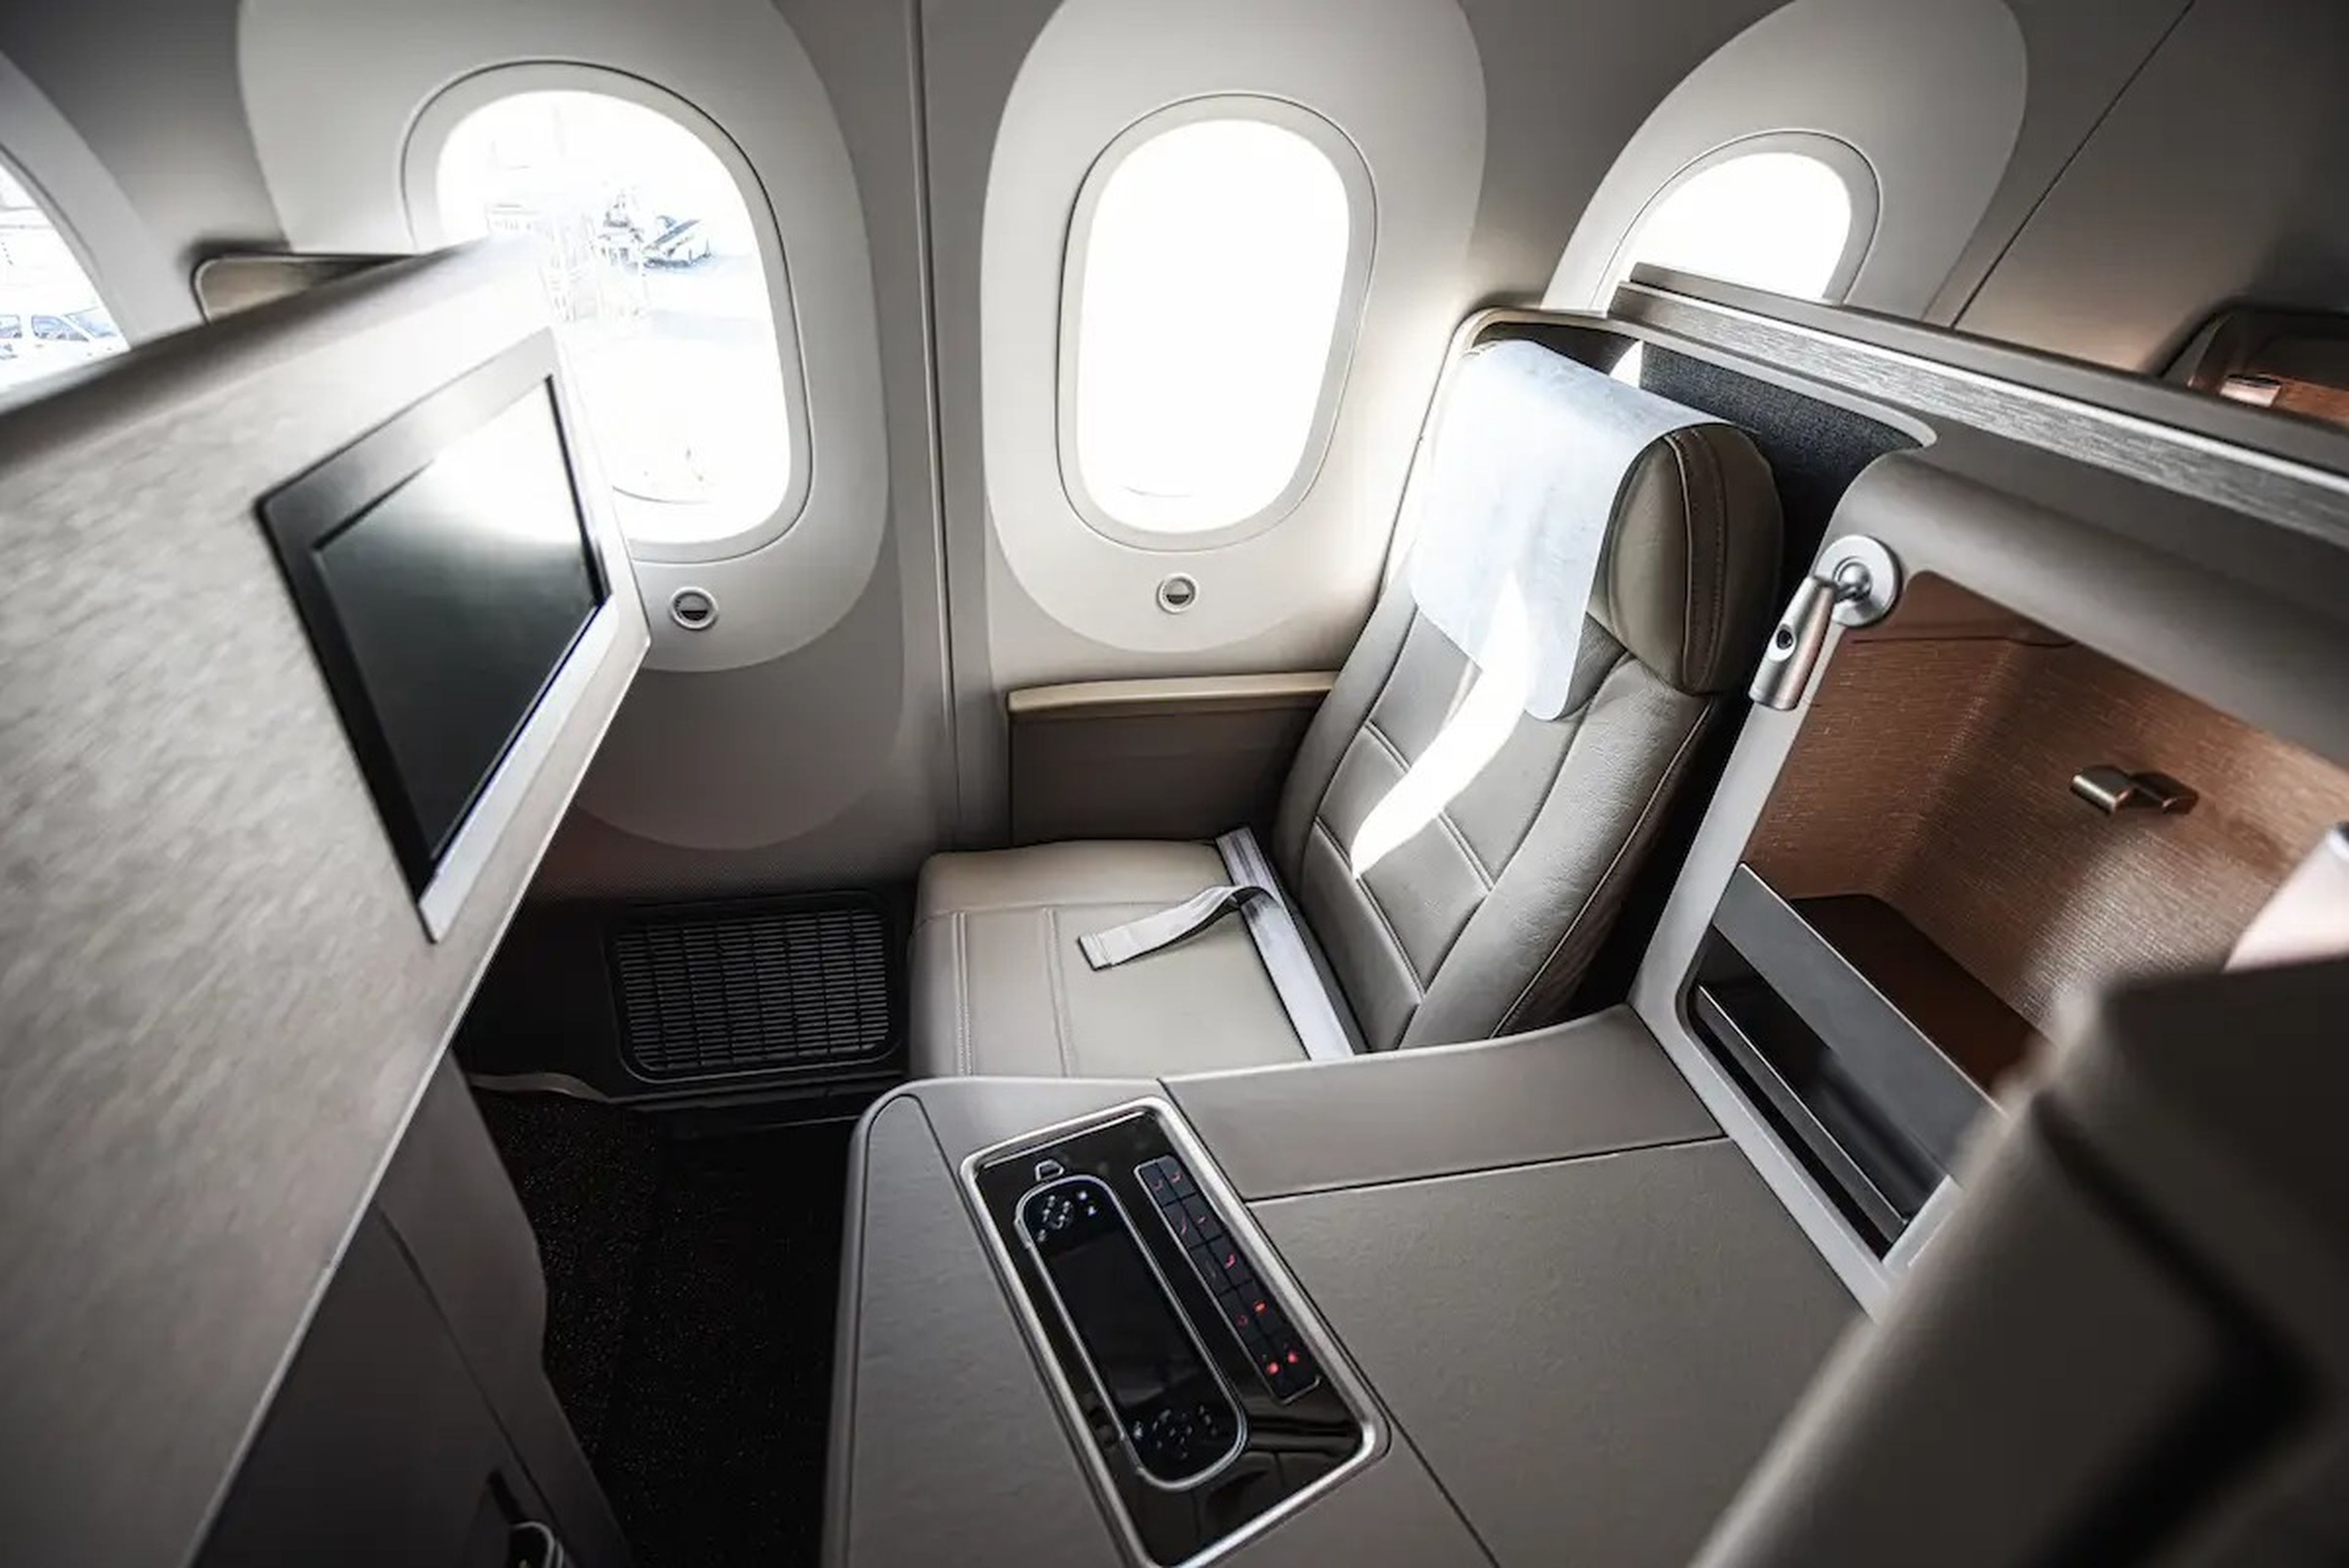 A view of a business class seat on a plane with a window, TV screen, and remote control.